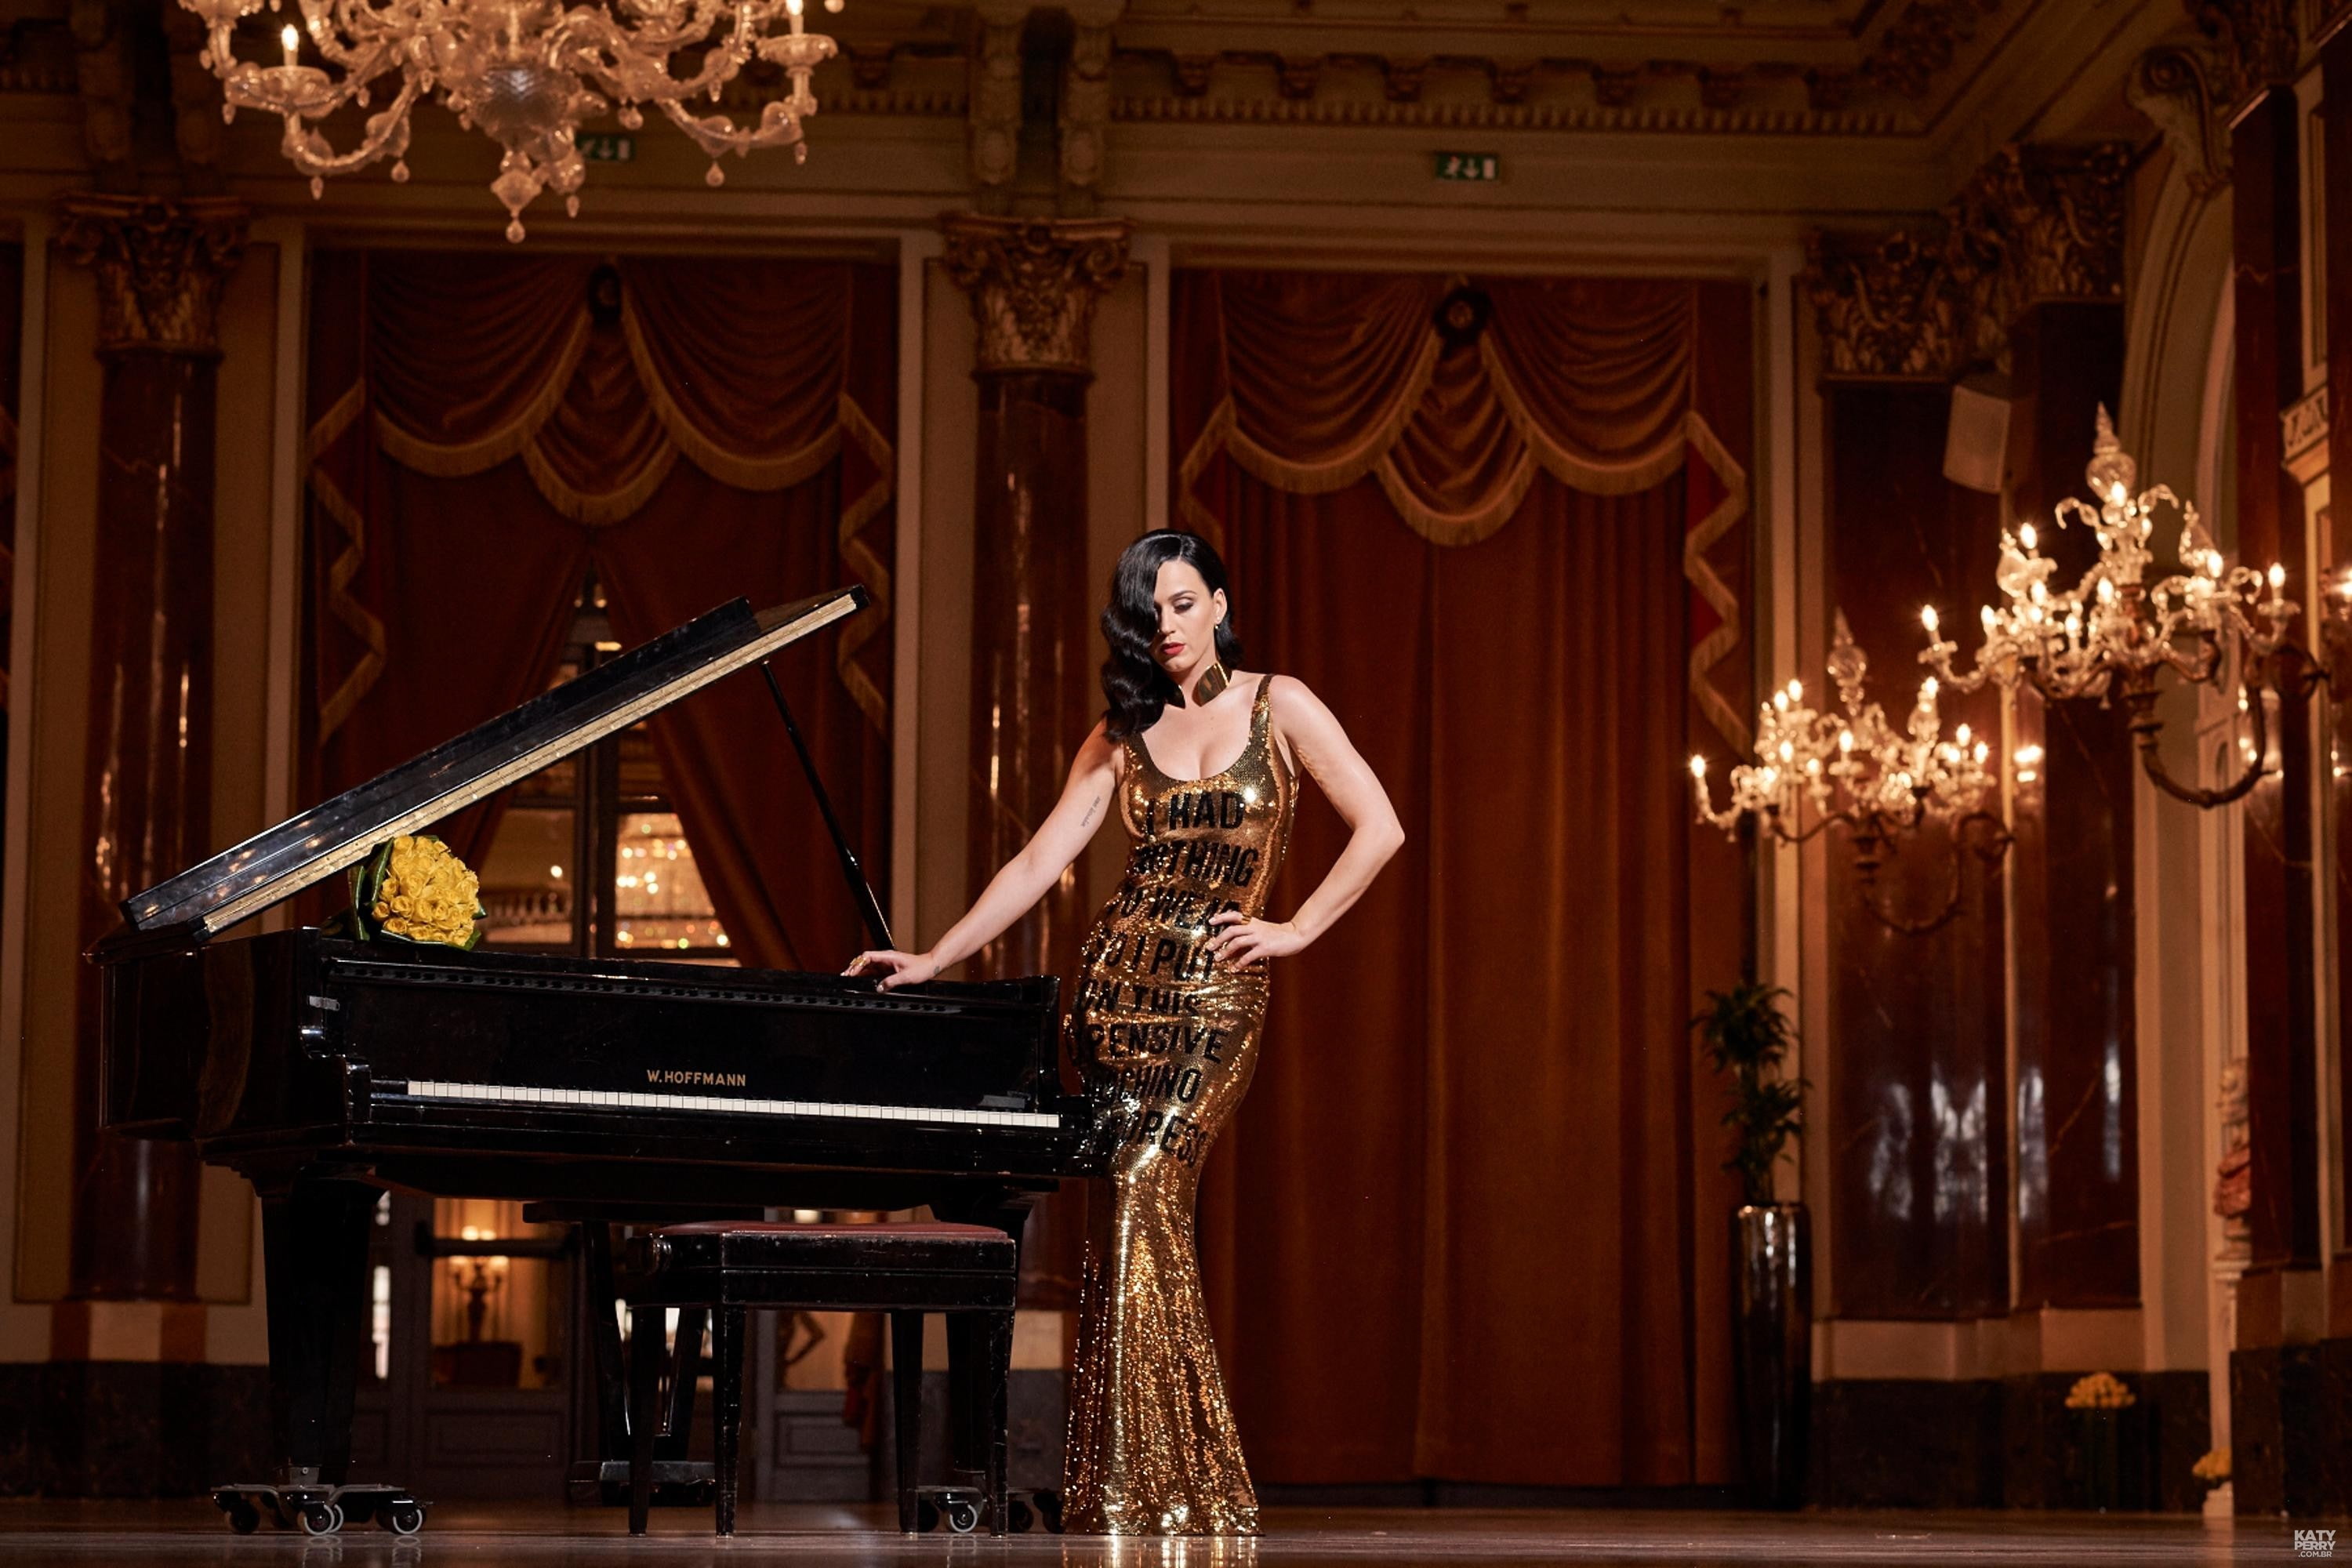 Katy Perry, girl, dress, singer, celebrity, posture, piano